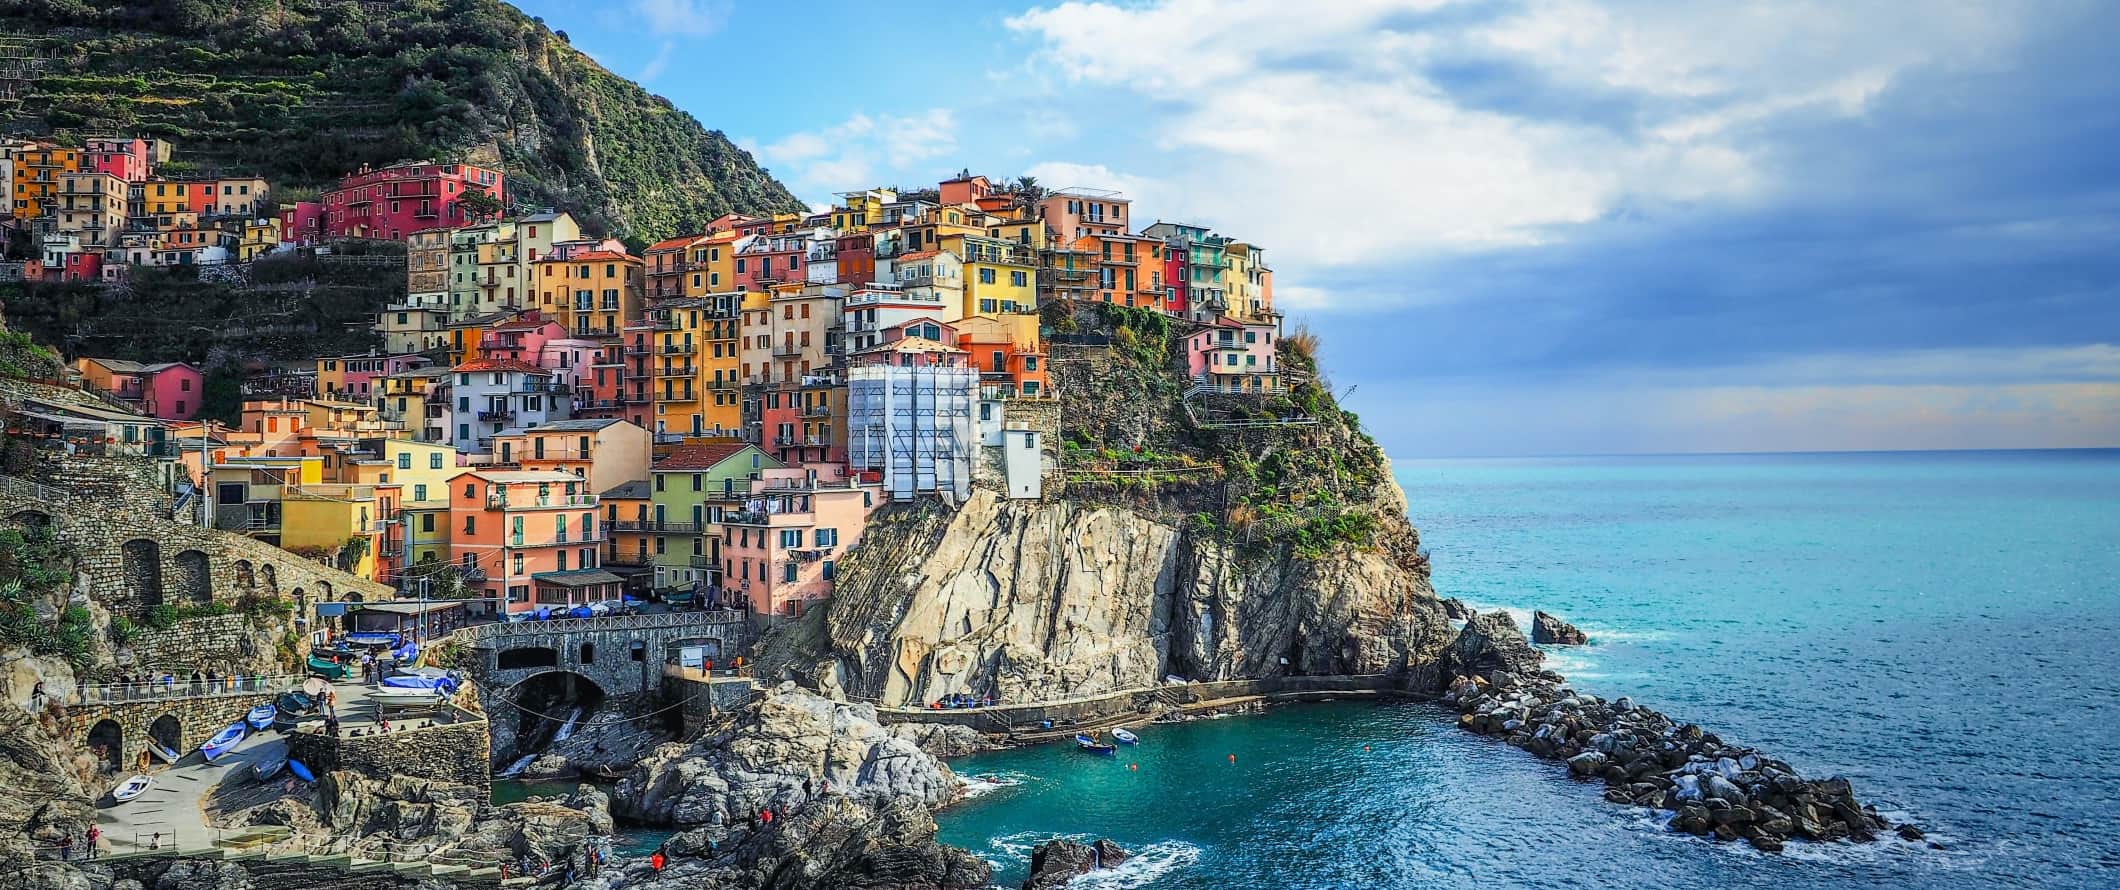 View over colorful town in the Cinque Terre along the coast in Italy.